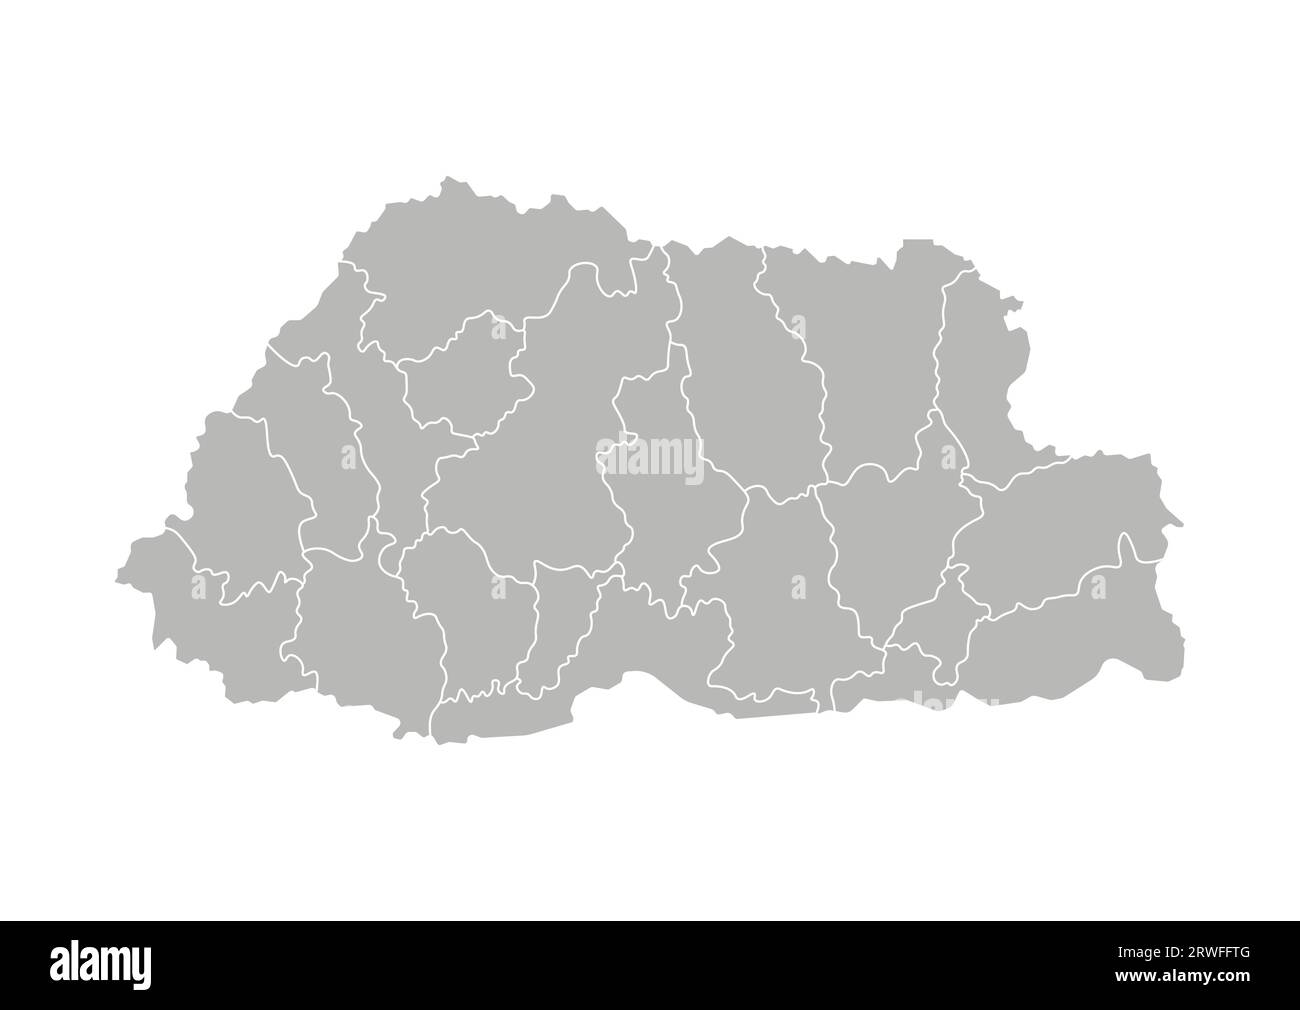 Vector isolated illustration of simplified administrative map of Bhutan. Borders of the provinces (regions). Grey silhouettes. White outline. Stock Vector